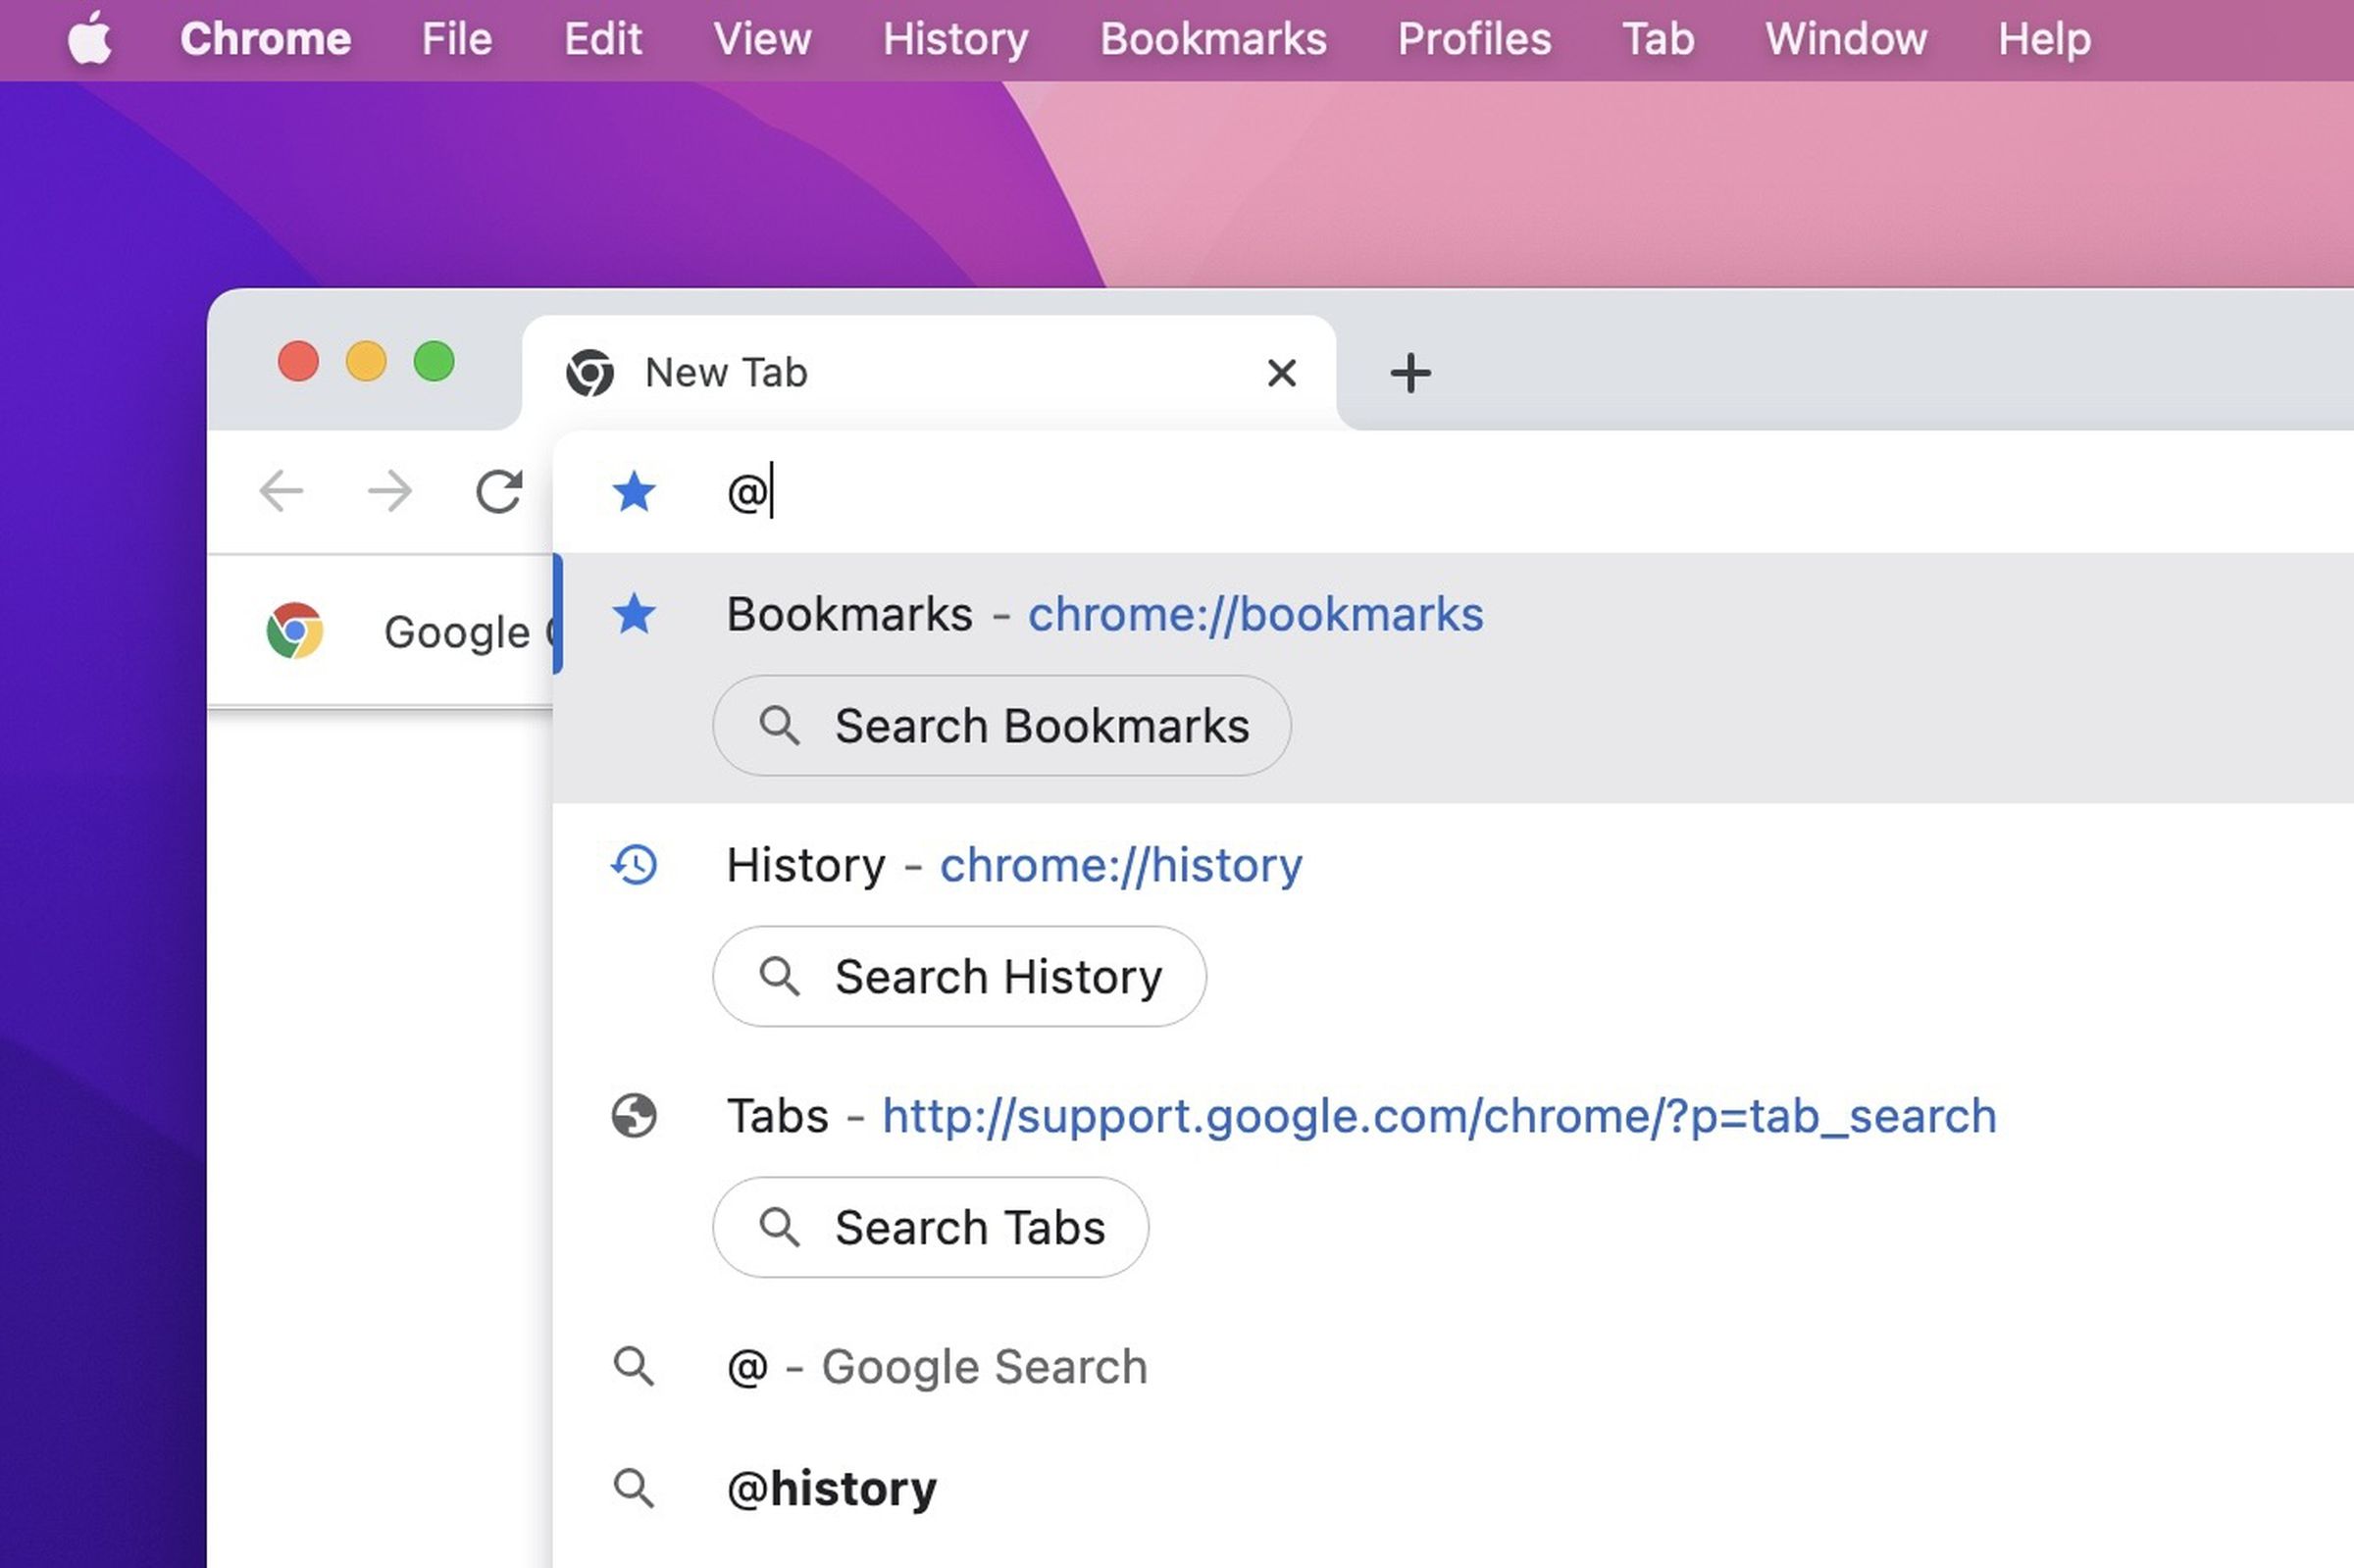 Typing an “@” in the address bar prompts you to select Bookmarks, History, or Tabs to search through.